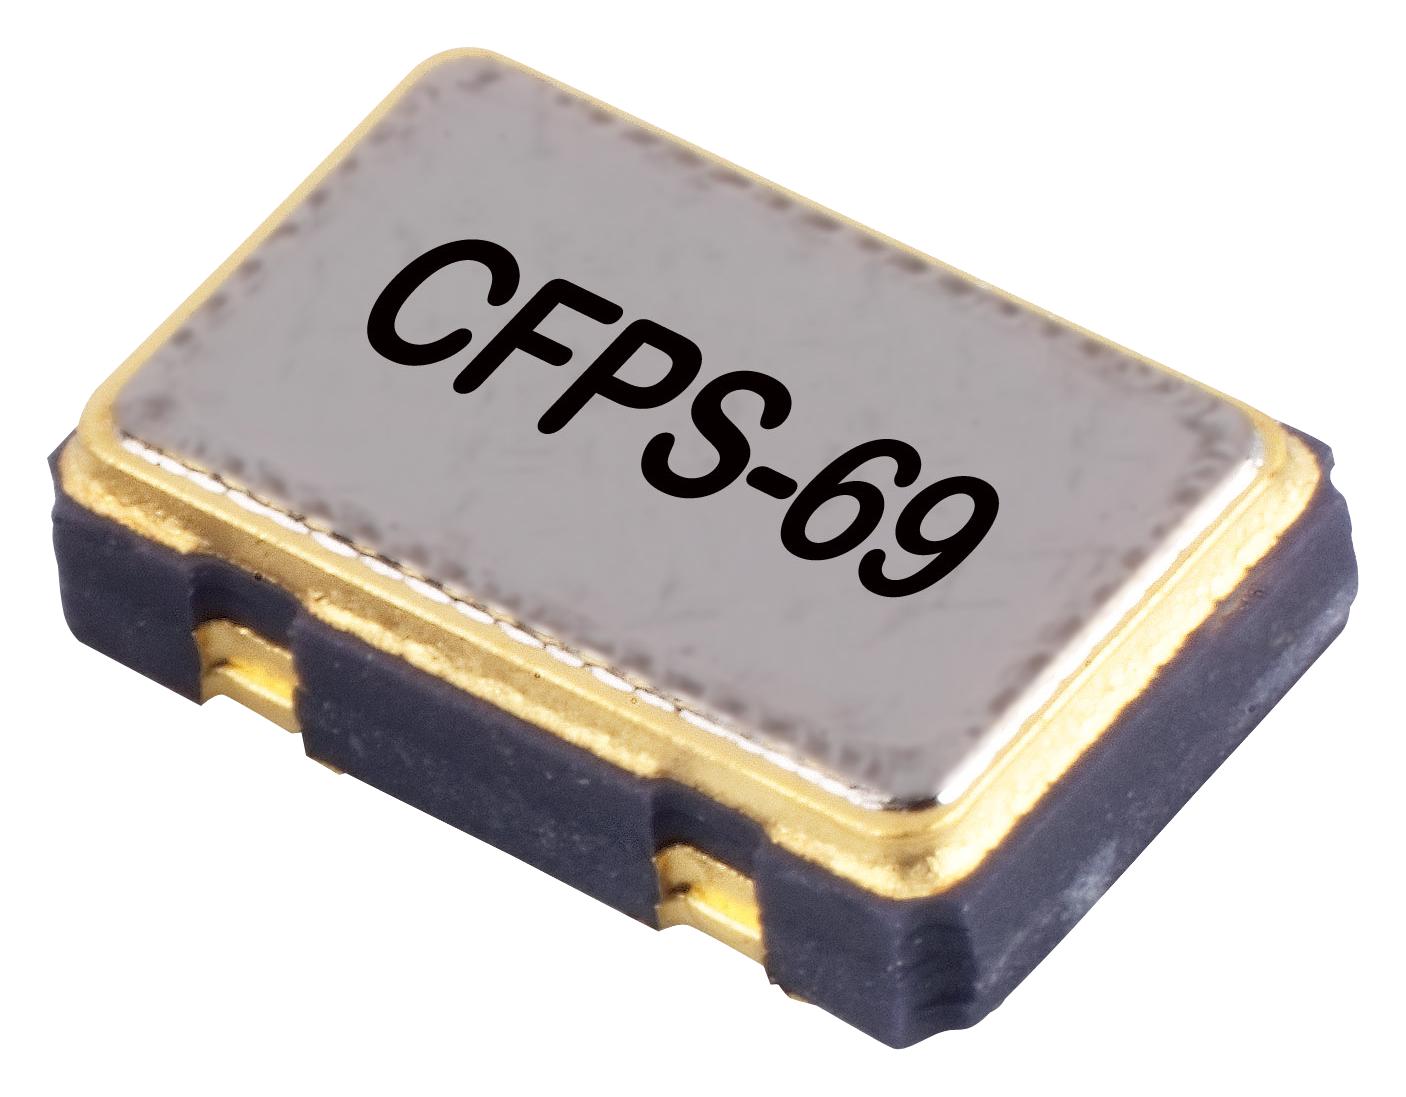 LFSPXO009592 CRYSTAL OSCILLATOR, SMD, 50MHZ IQD FREQUENCY PRODUCTS